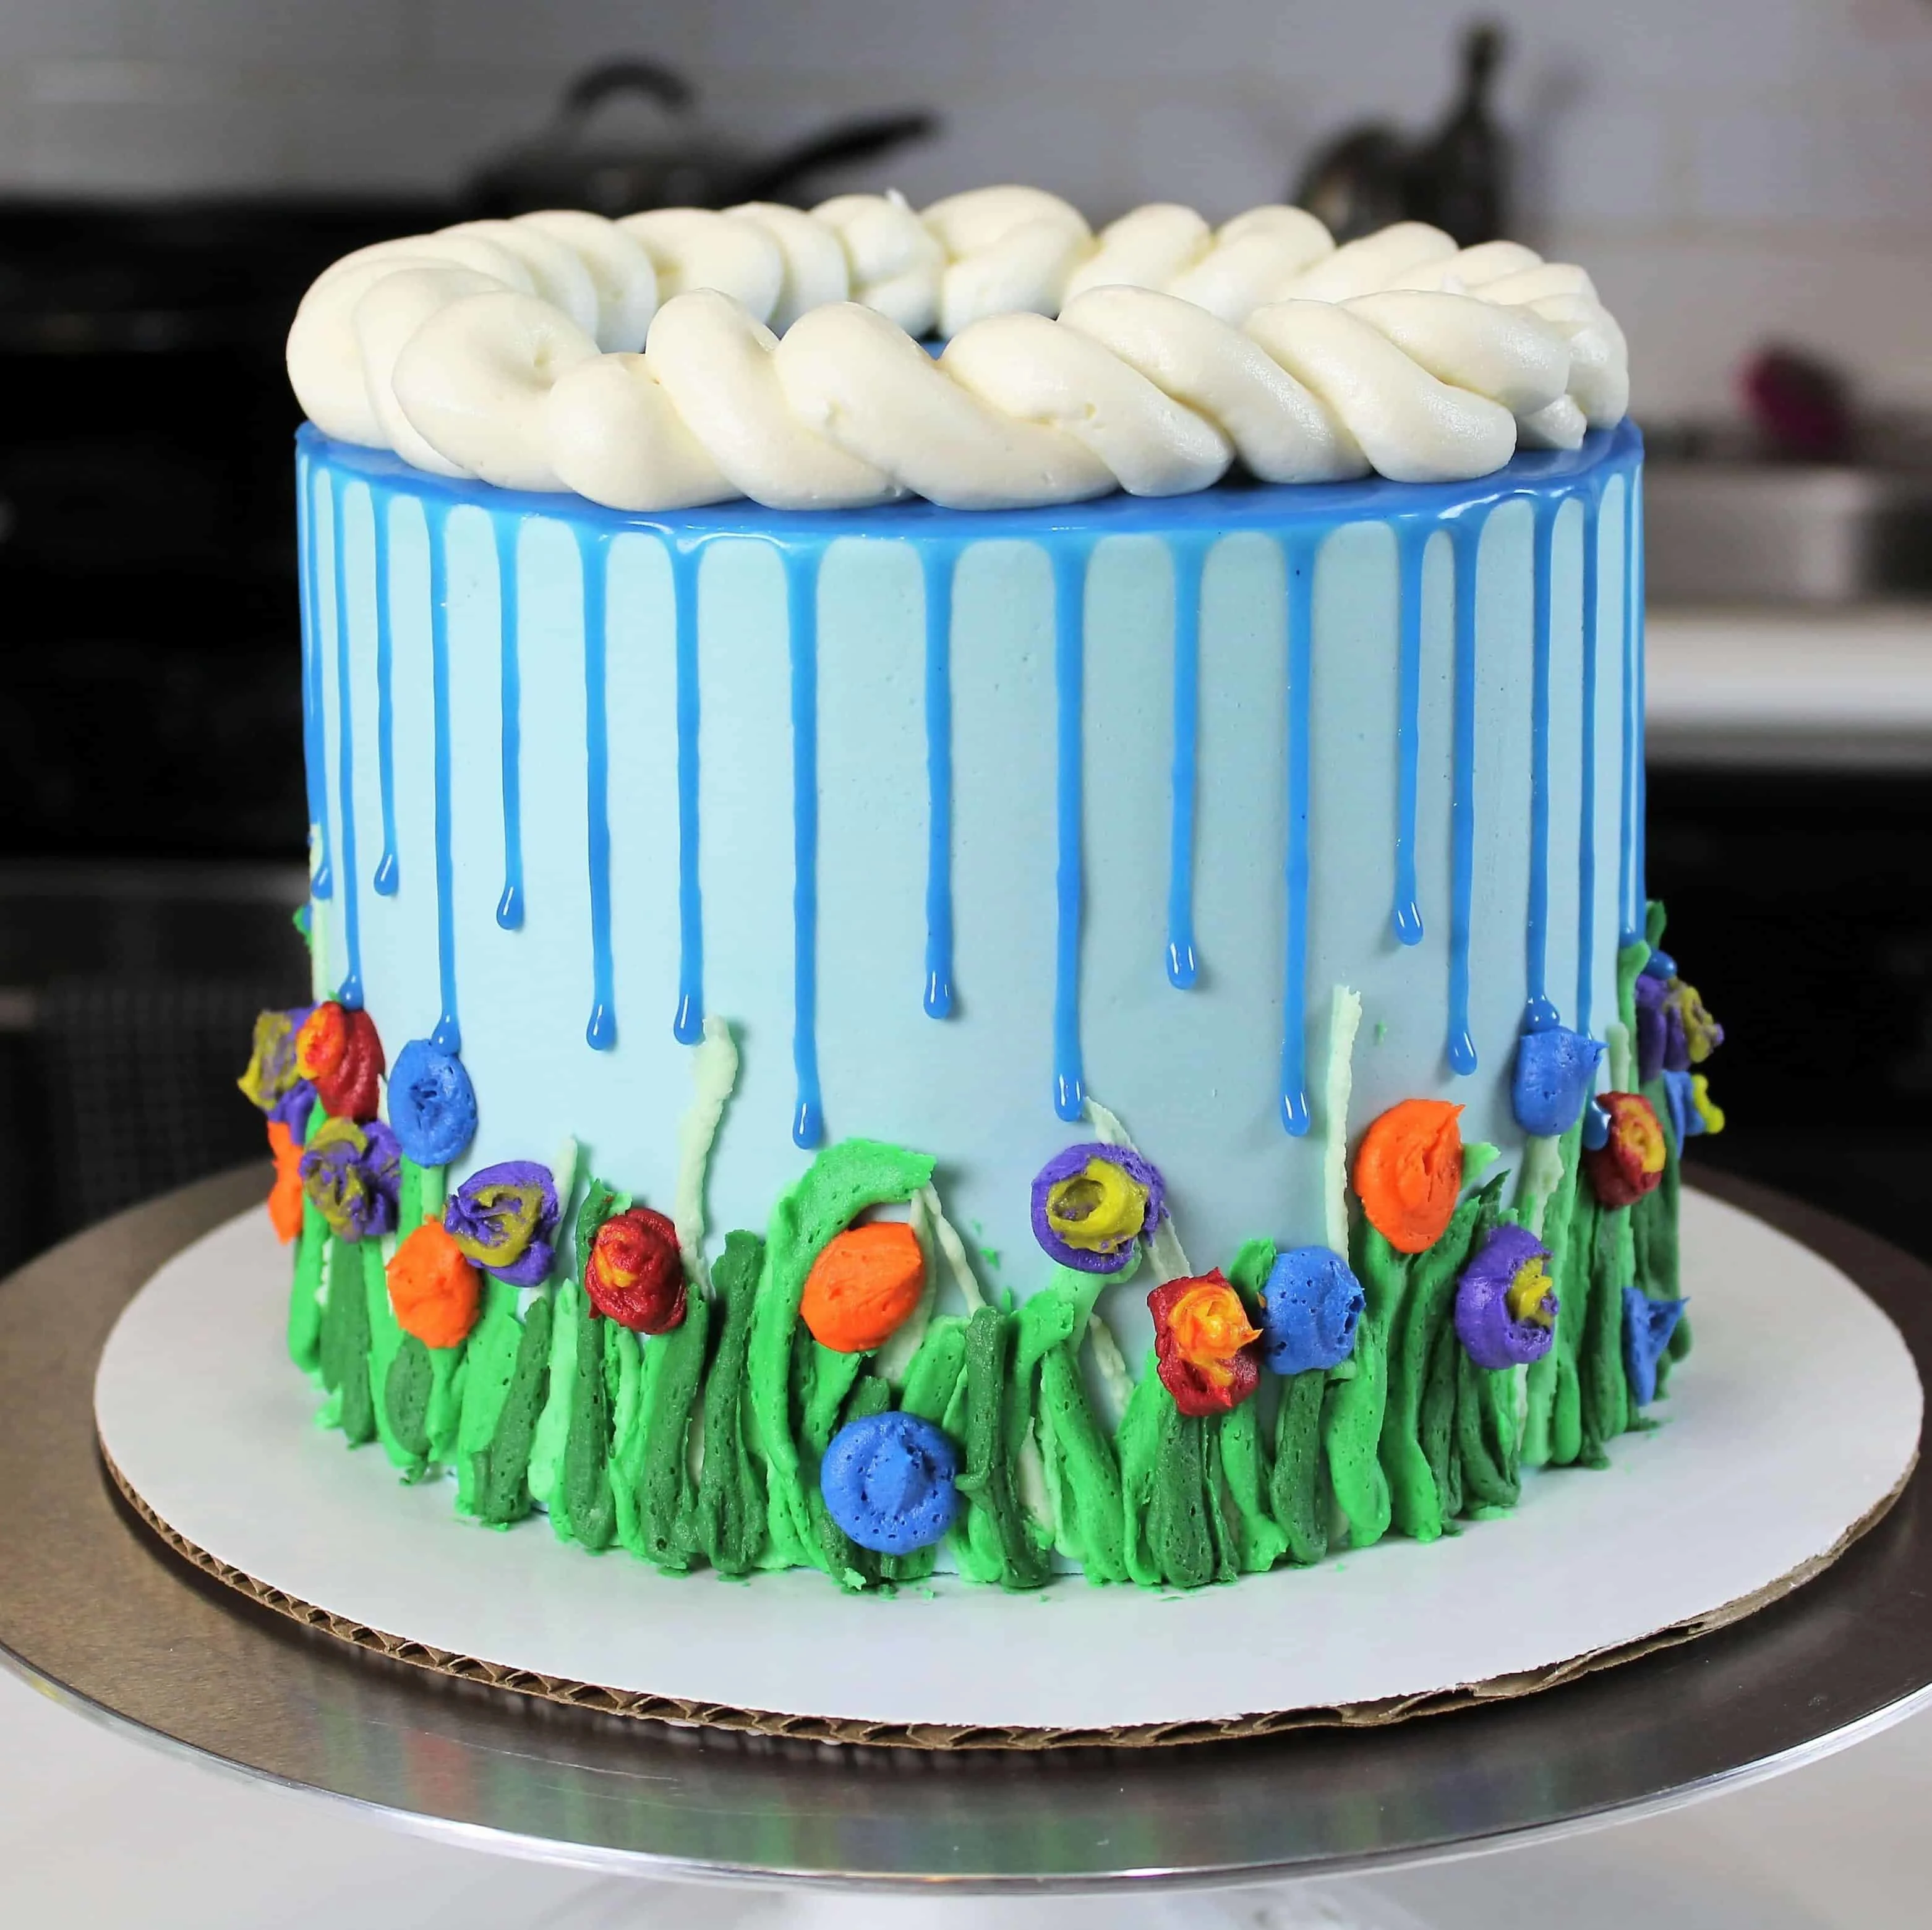 April showers cake with blue drips to look like rain